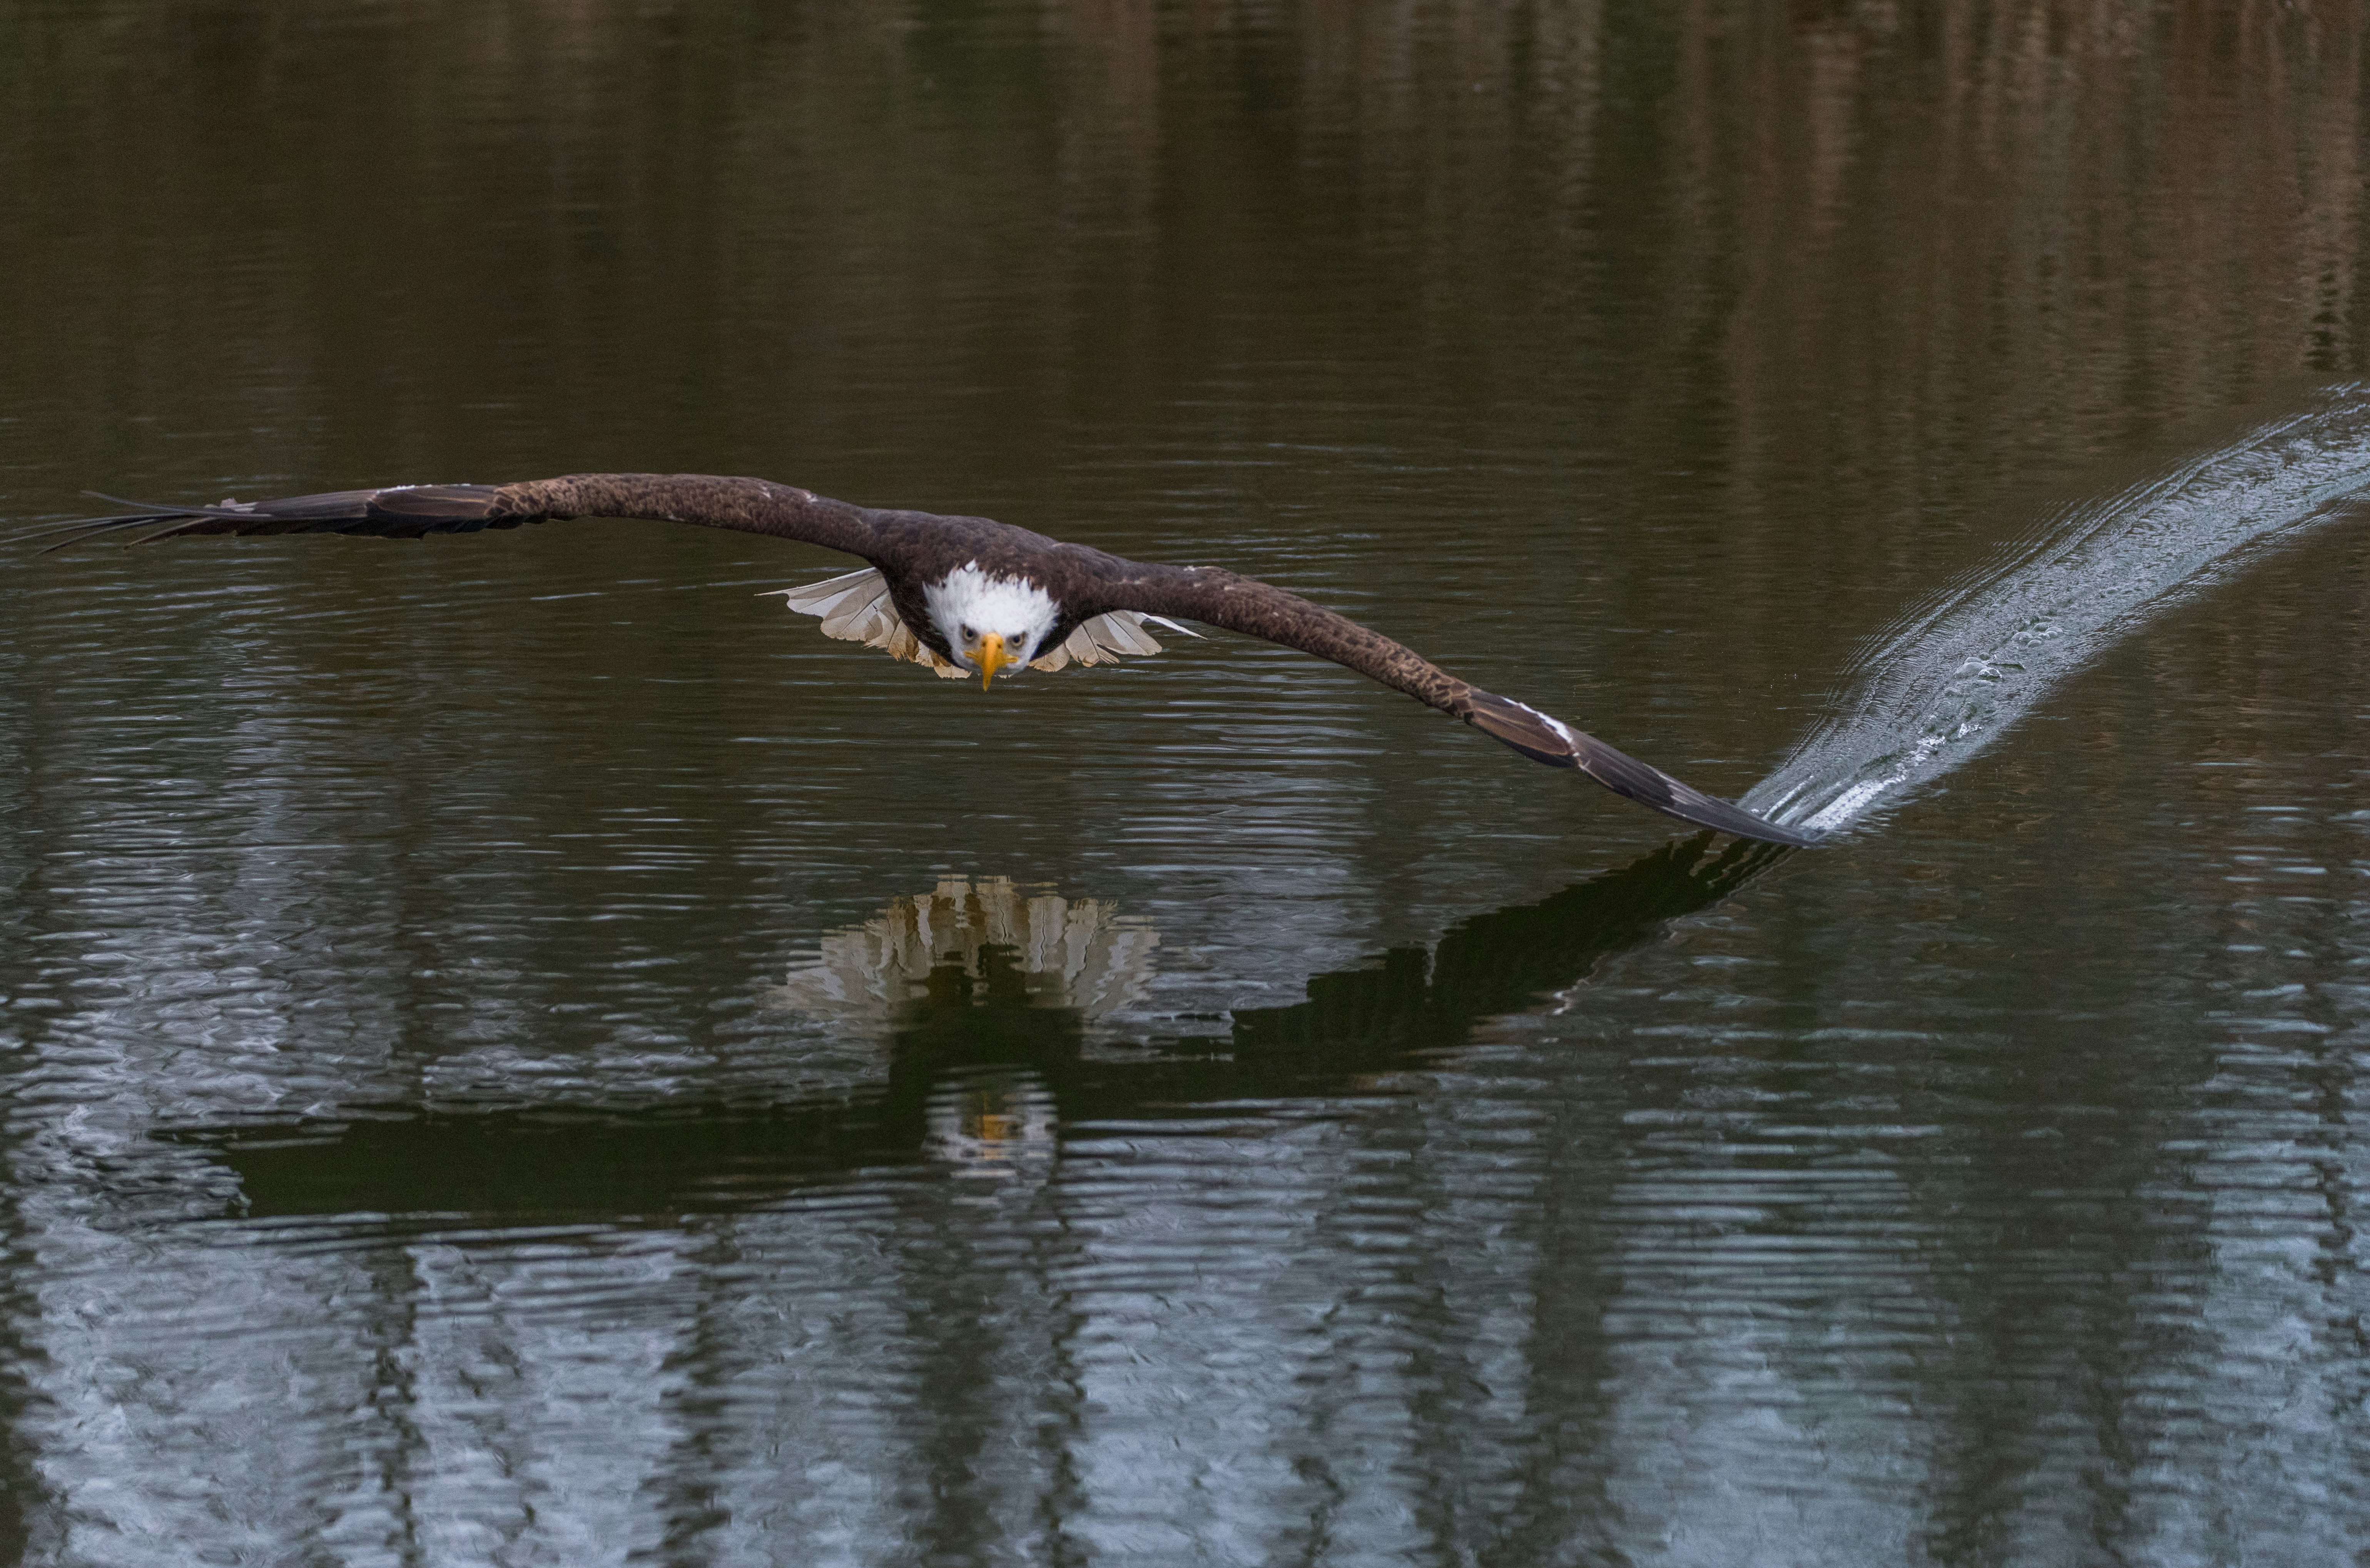 eagle touchinh water with its wings